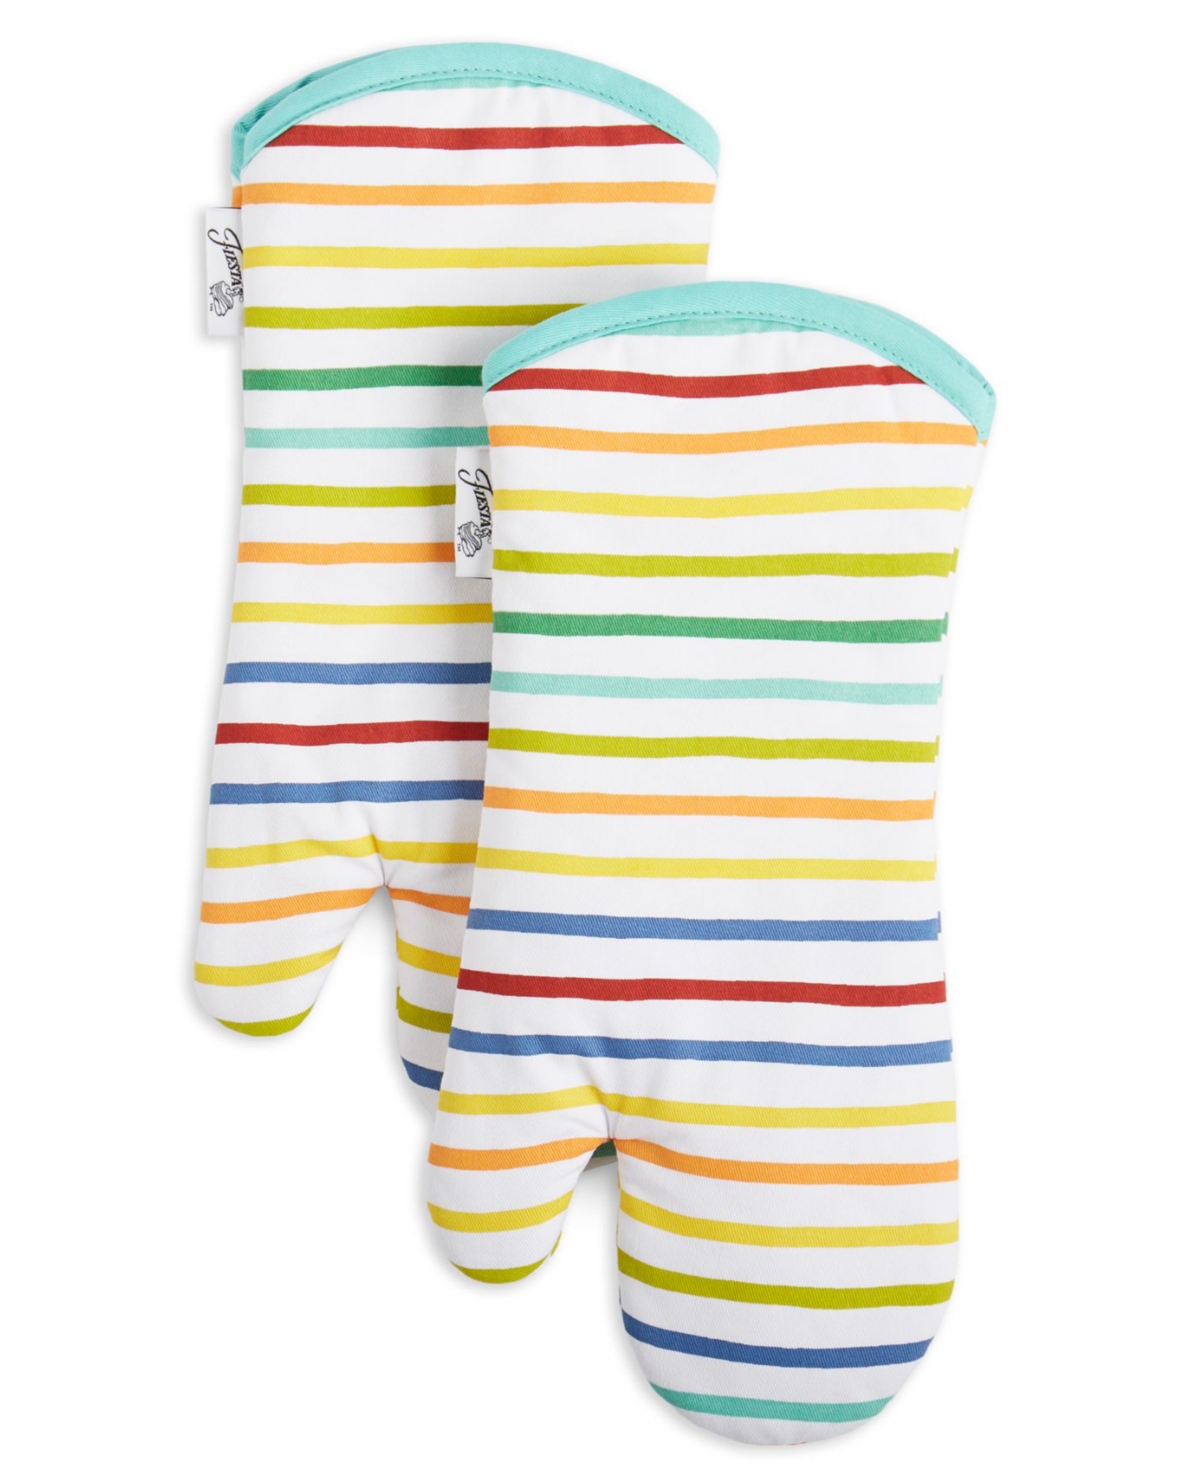 Tropical Stripe Oven Mitts, Set of 2 - Multi